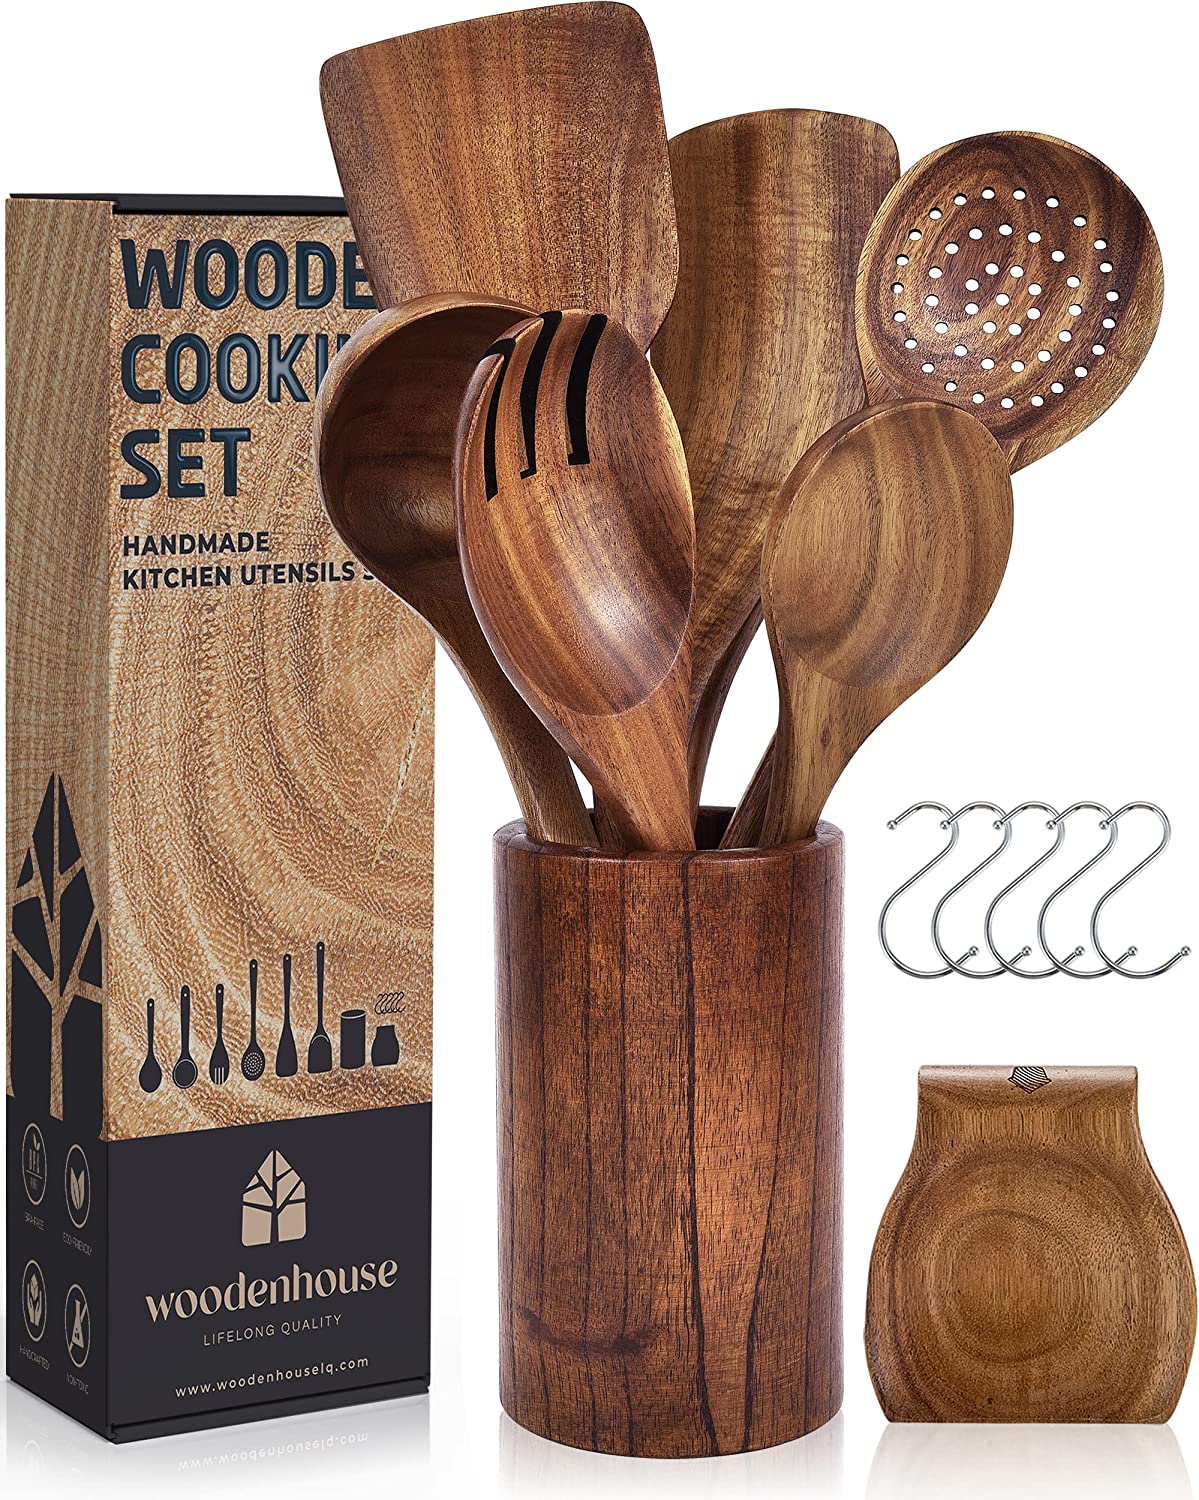 Cooking Utensils Products at